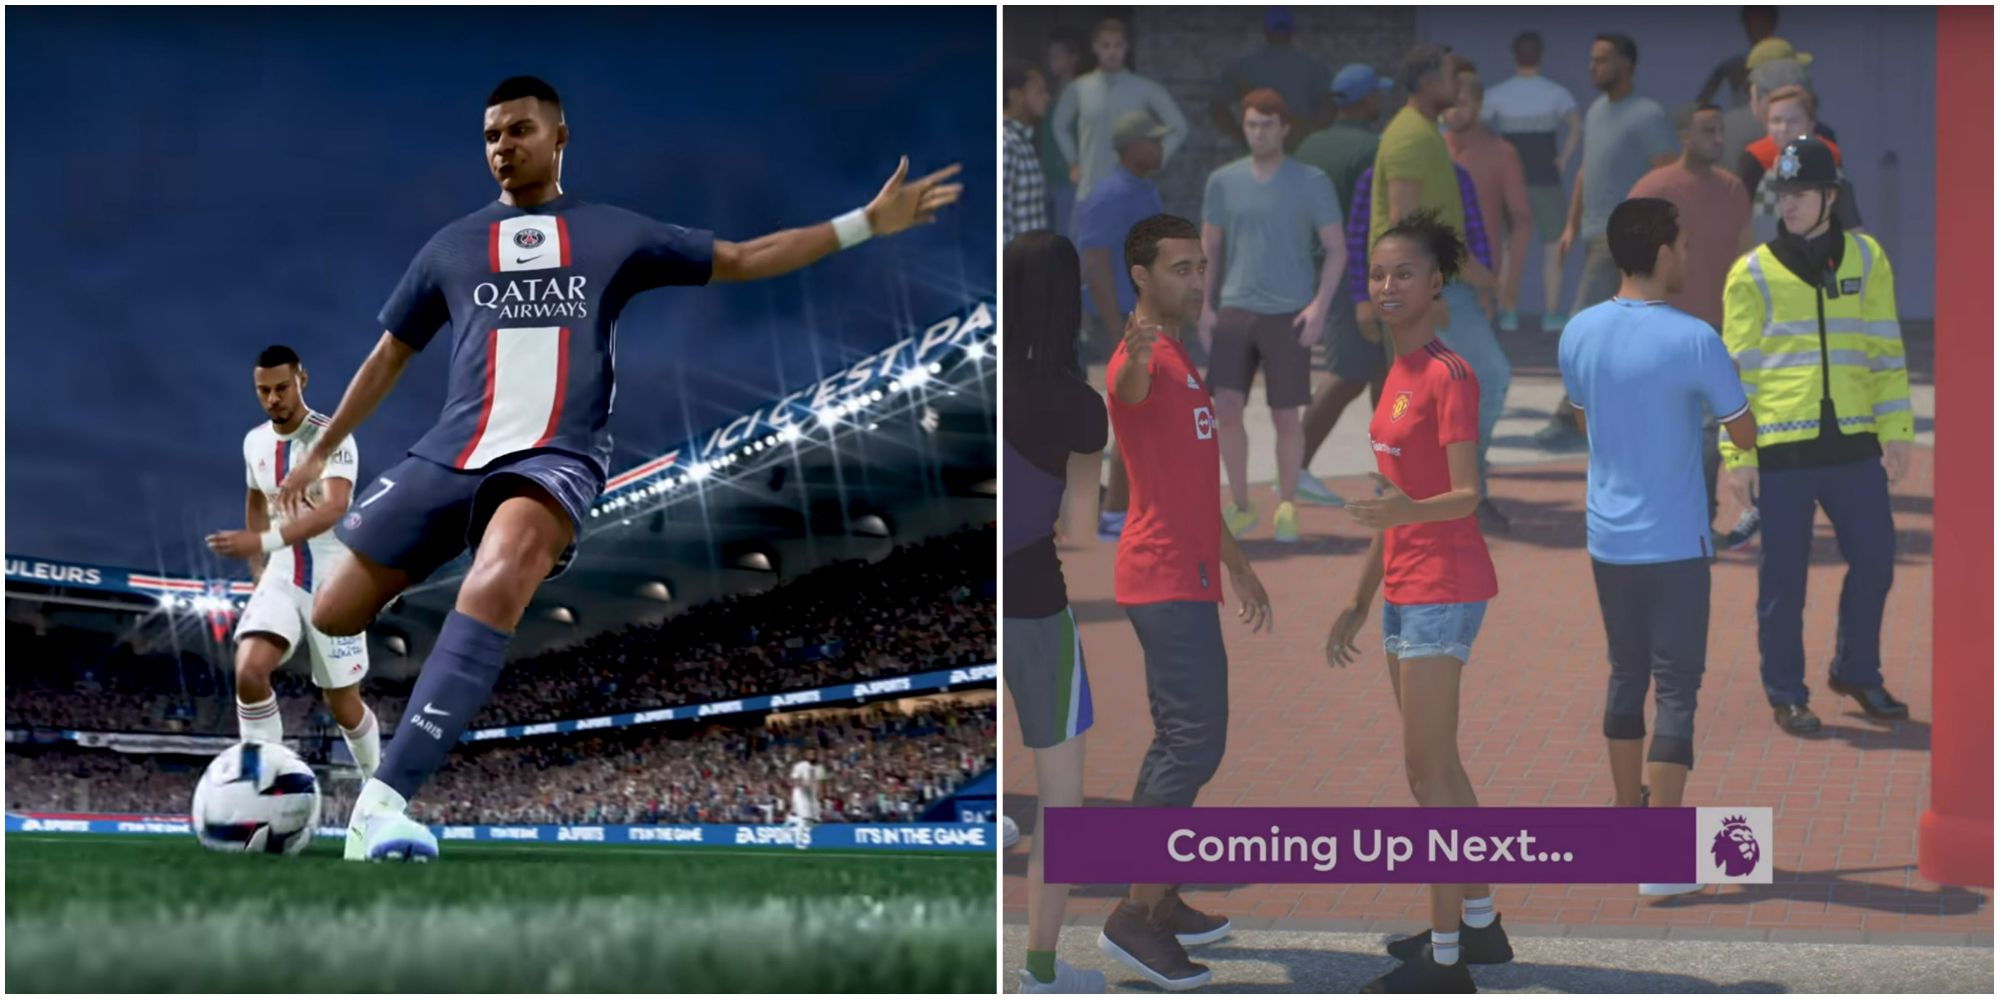 FIFA 23 NEWS  ALL NEW *LEAKED* Player Career Mode FEATURES ✓ 